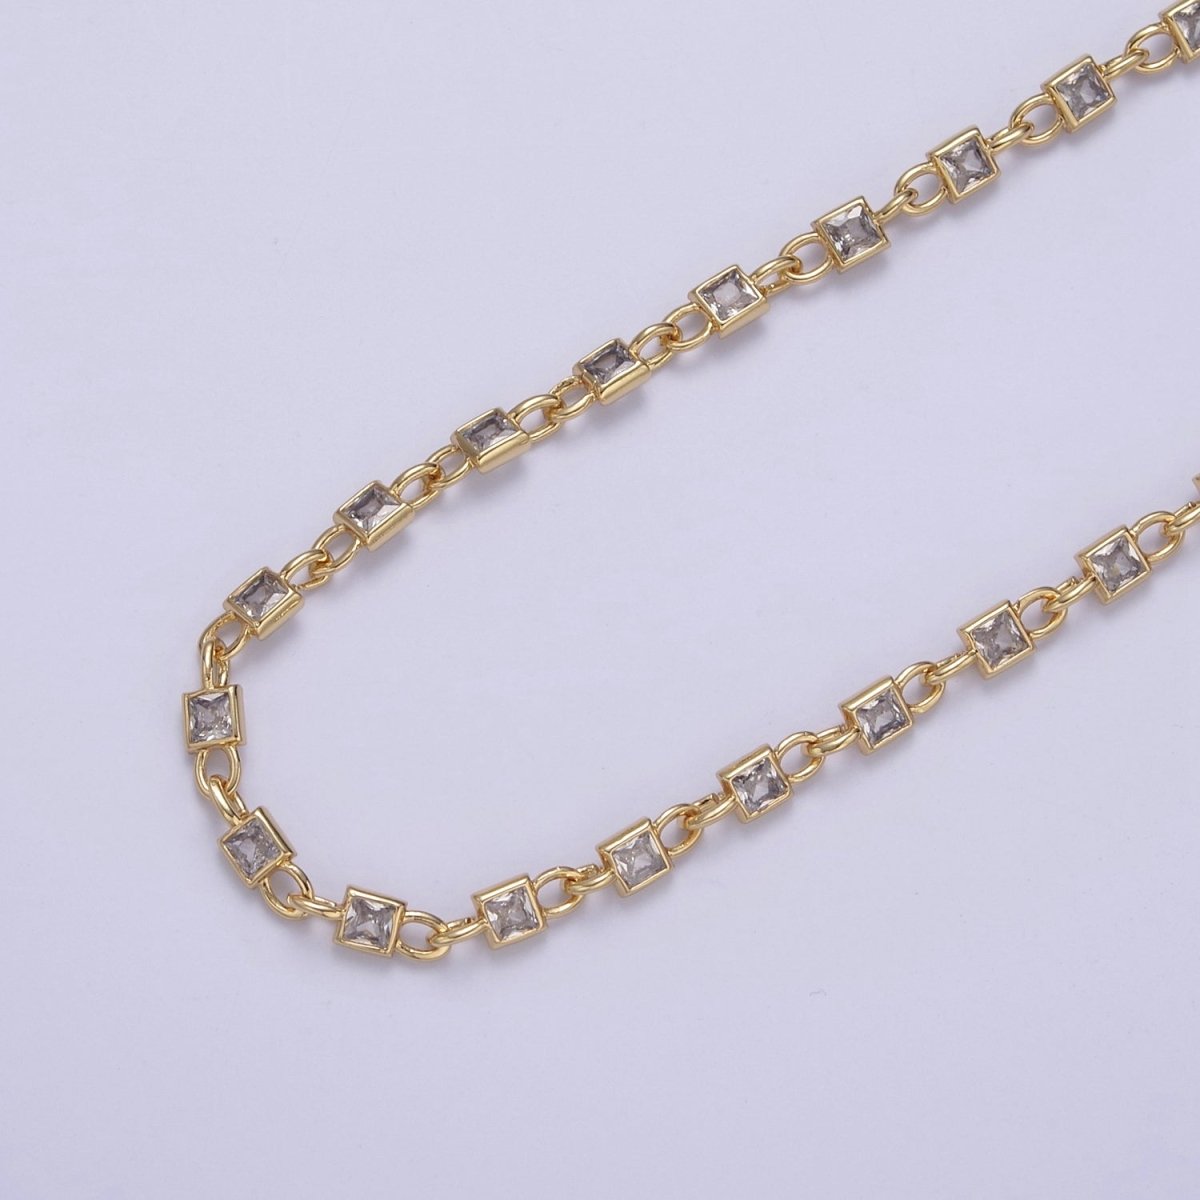 CZ Chain By The Yard, Genuine 4mm Square Shape CZ Bezel Chain Gold BULK Wholesale Cz Connector Chains | ROLL-758 759 760 761 Clearance Pricing - DLUXCA